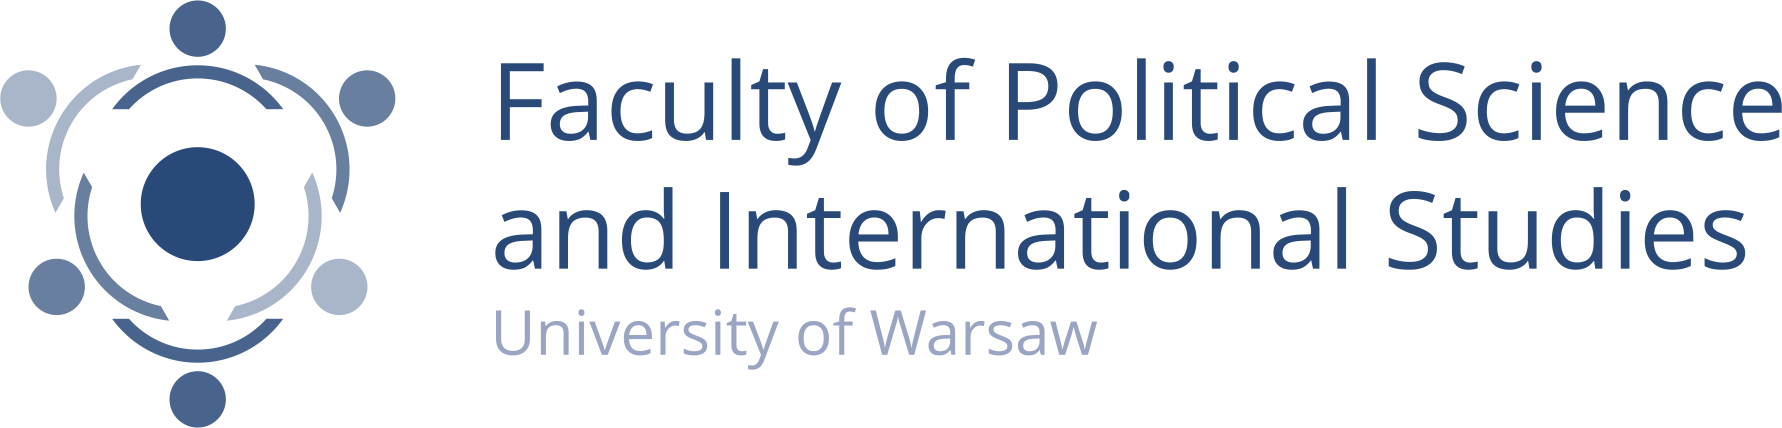 UW Faculty of Political Science and International Studies